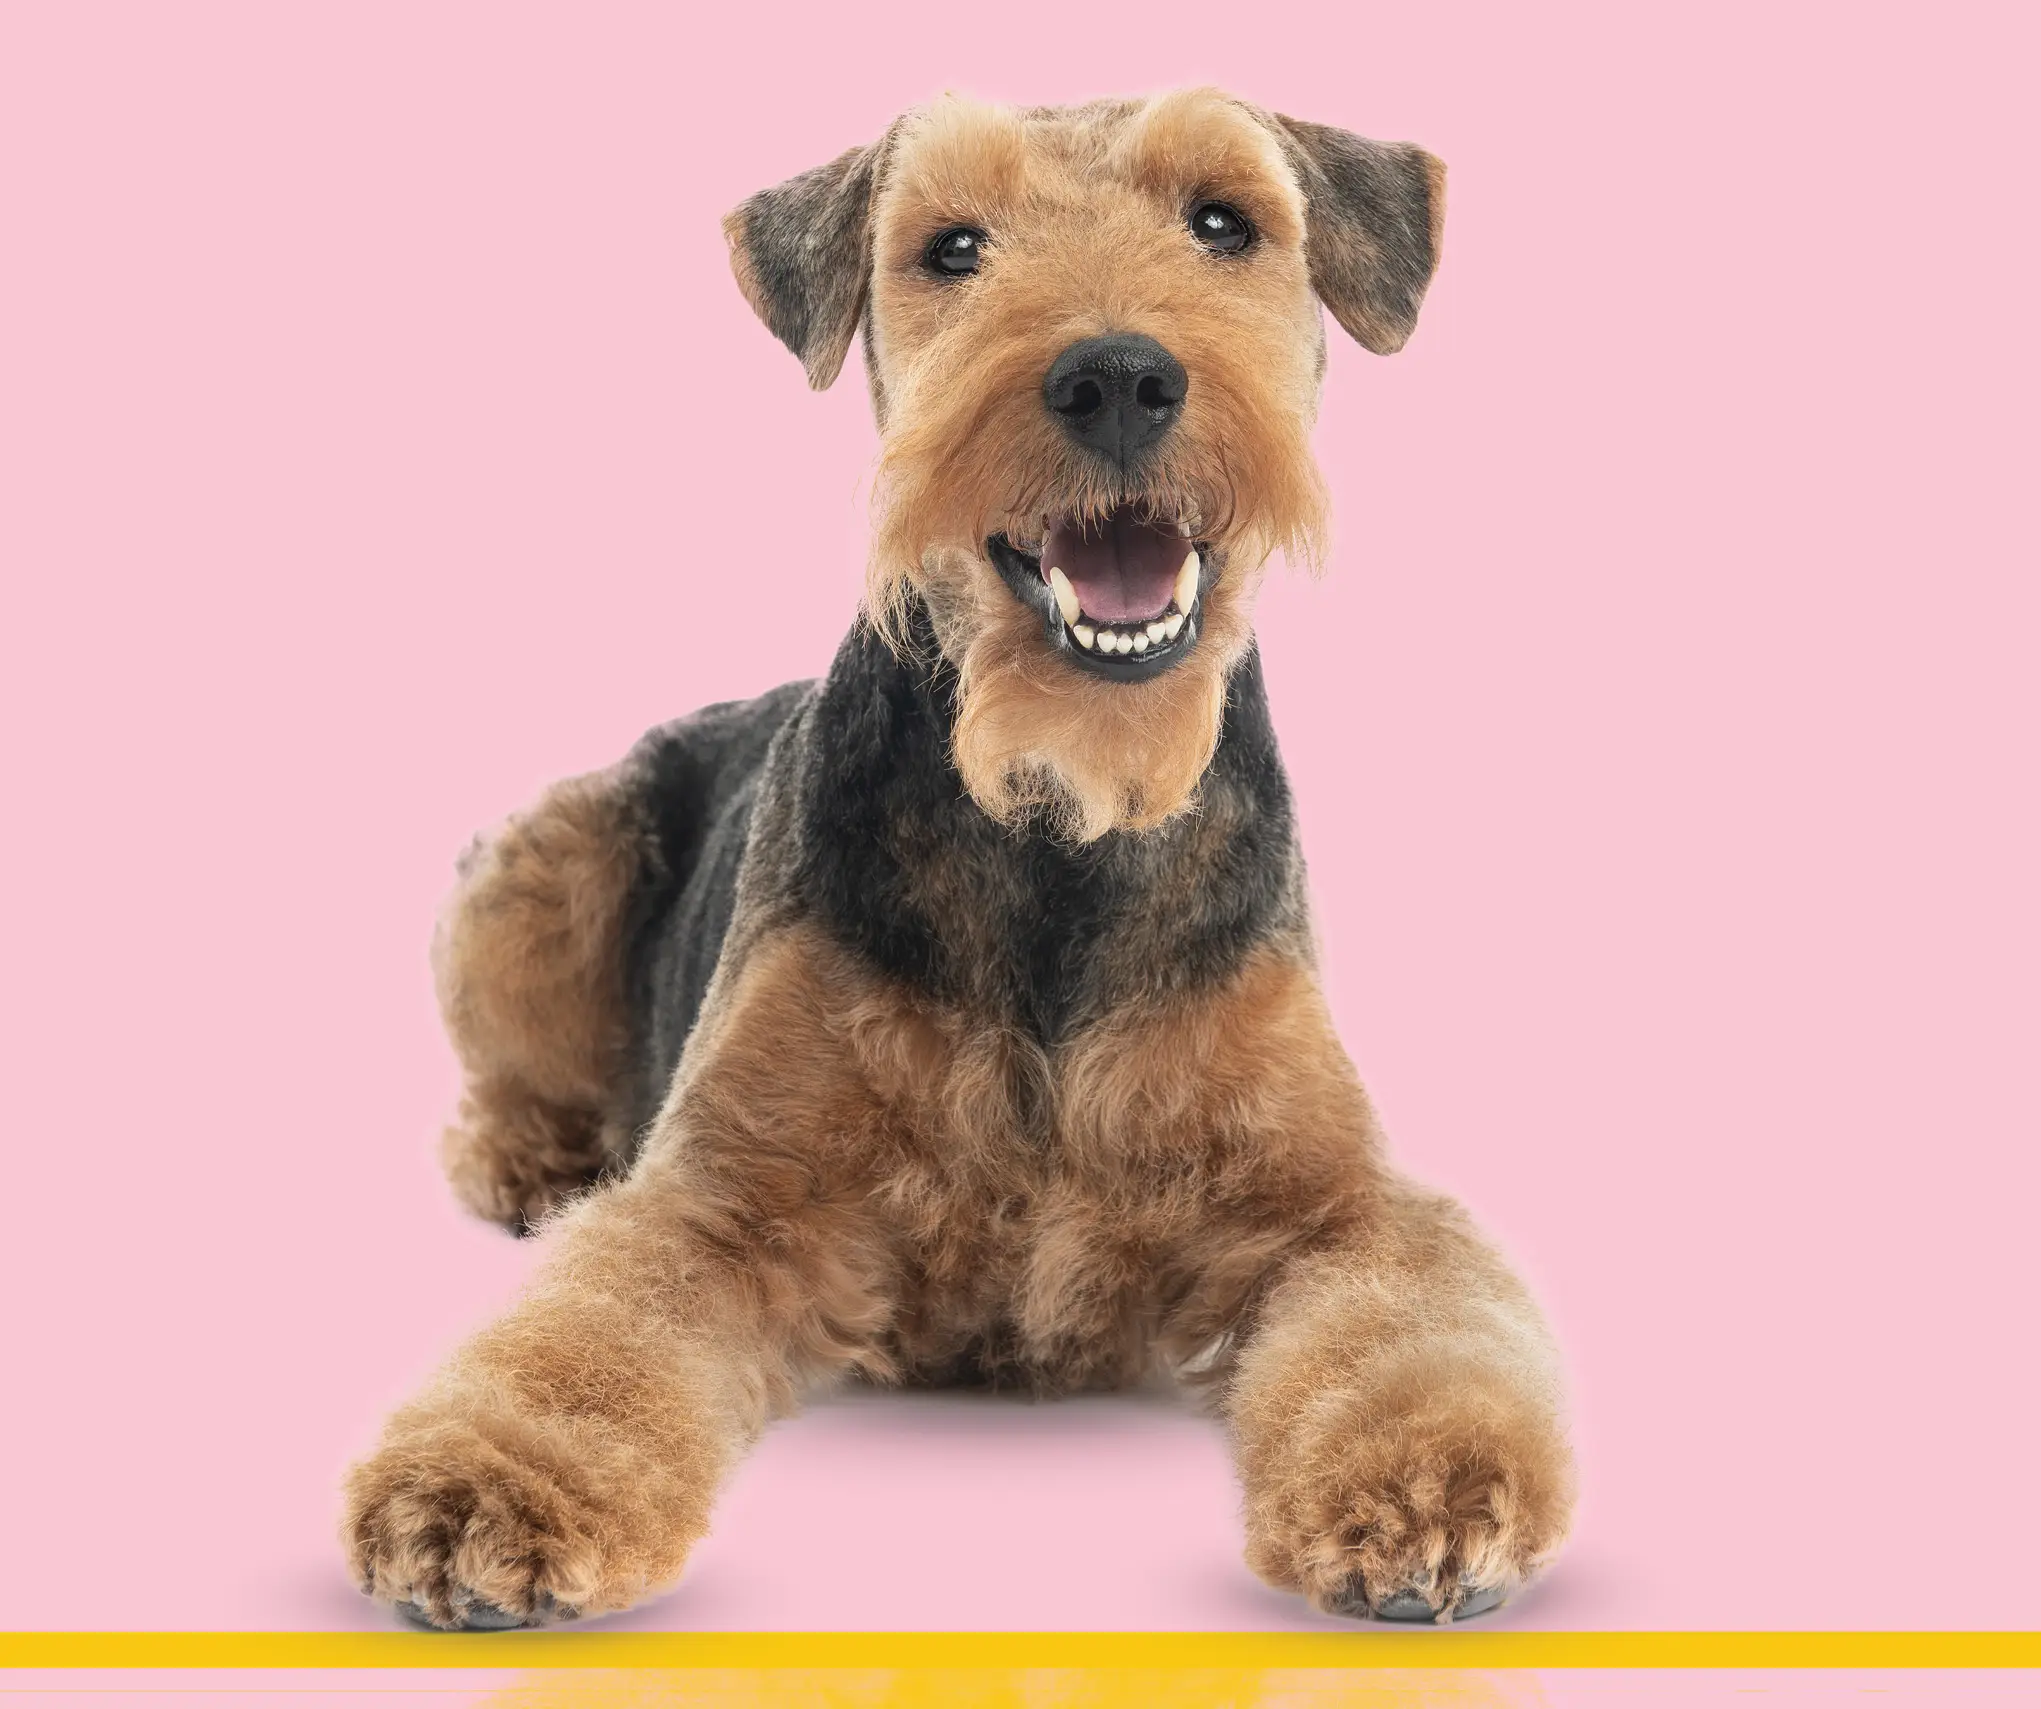 Groomed dog with pink background